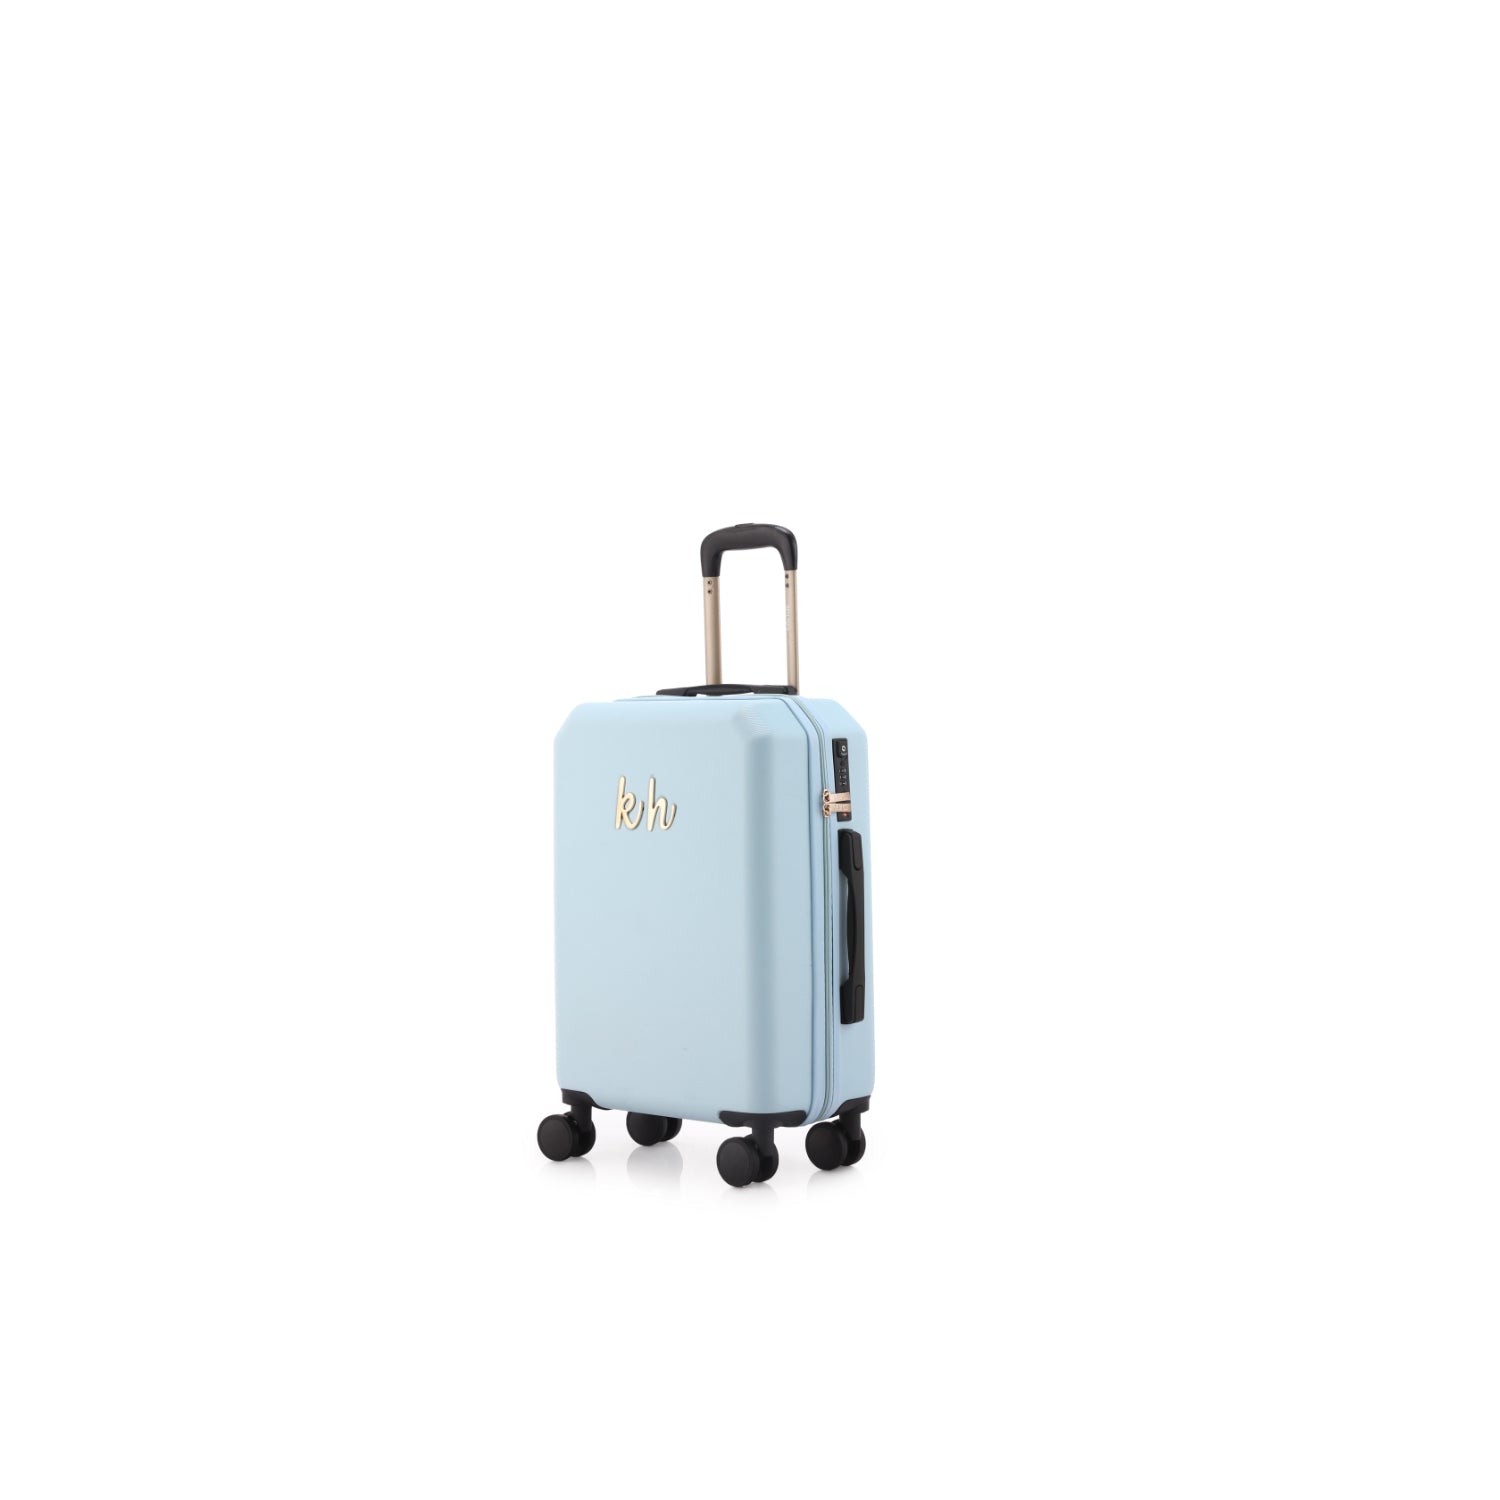 Kate Hill - KH-2301 Small Manhattan Suitcase - Sky